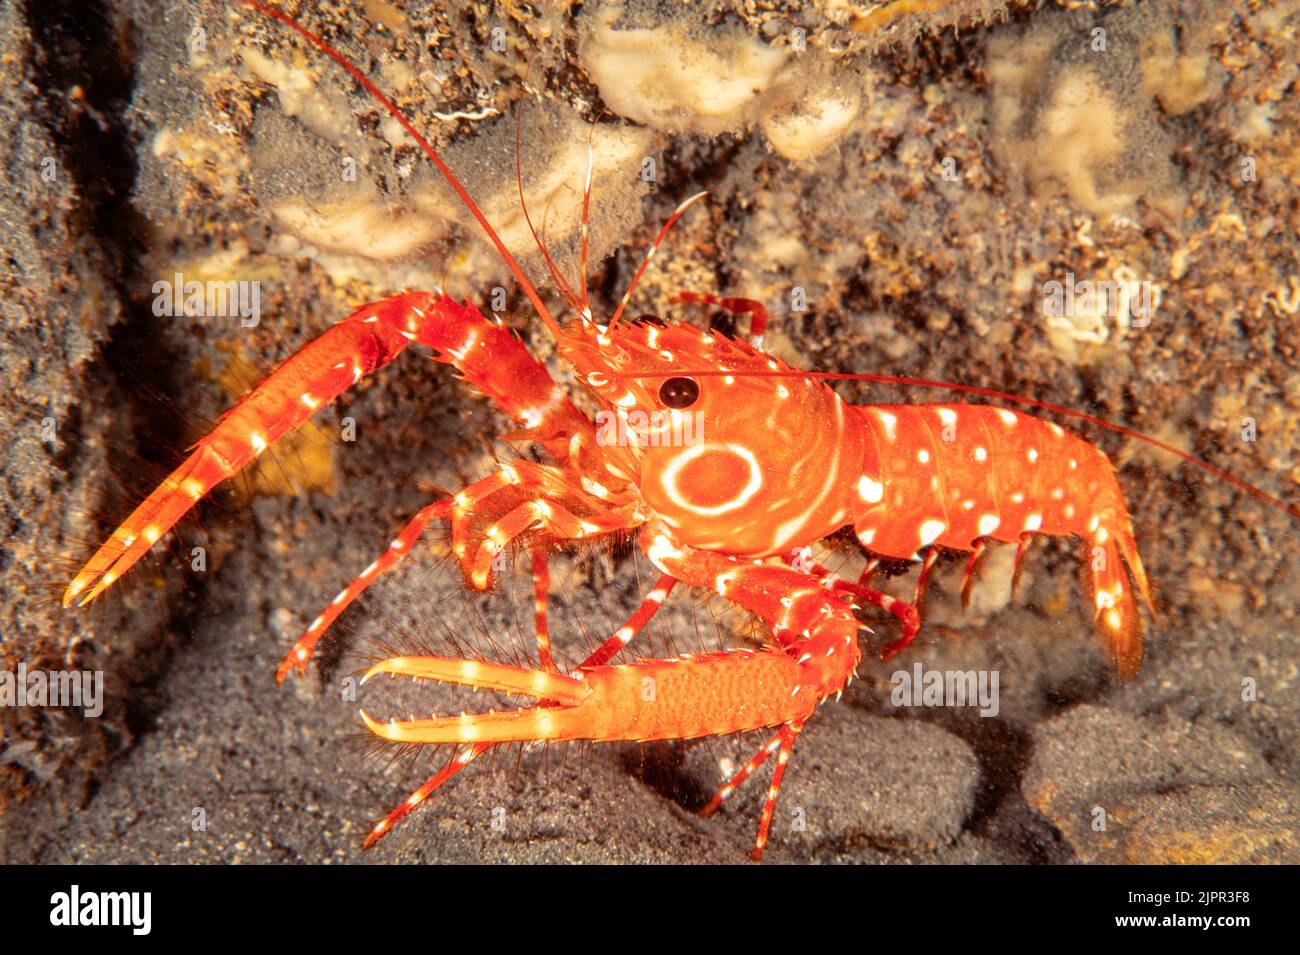 The bullseye reef lobster, Hoplometopus holthuisi, is found deep into caverns and lava tubes in Hawaii. Stock Photo